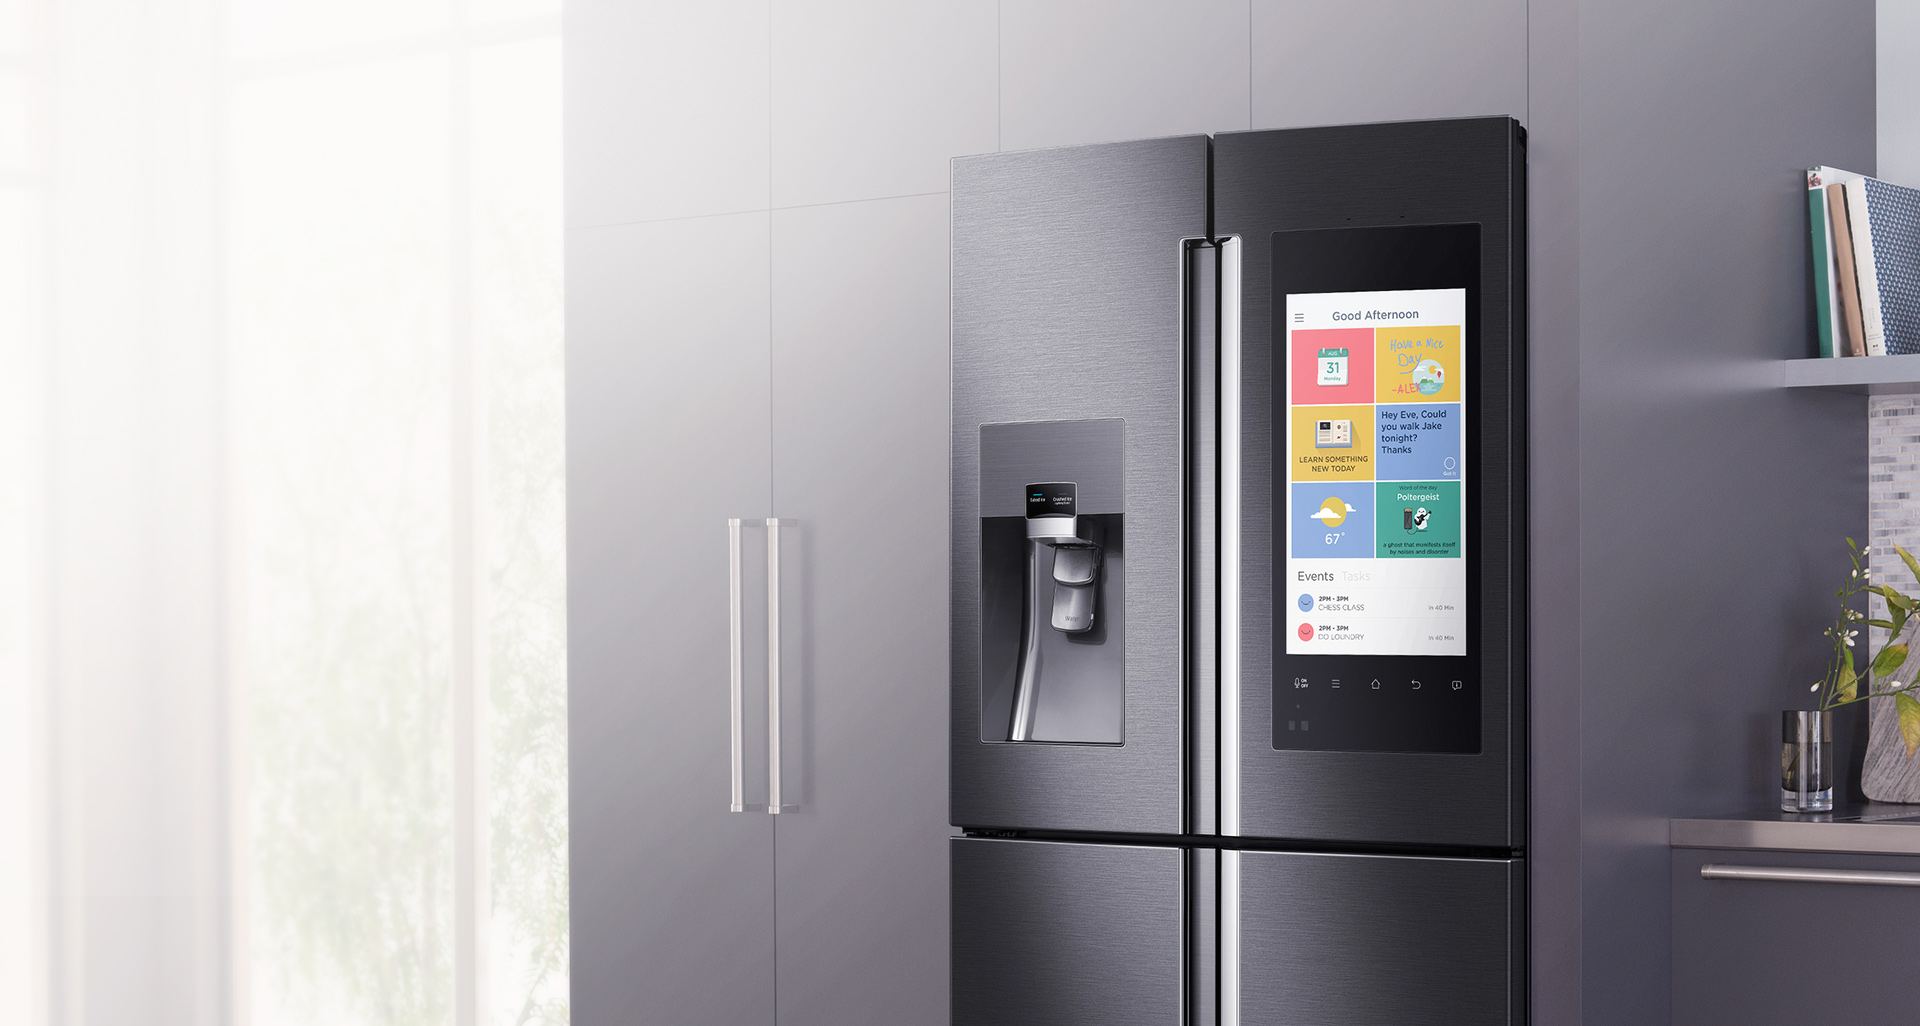 How to Control Your Smart Refrigerator from Your Smartphone